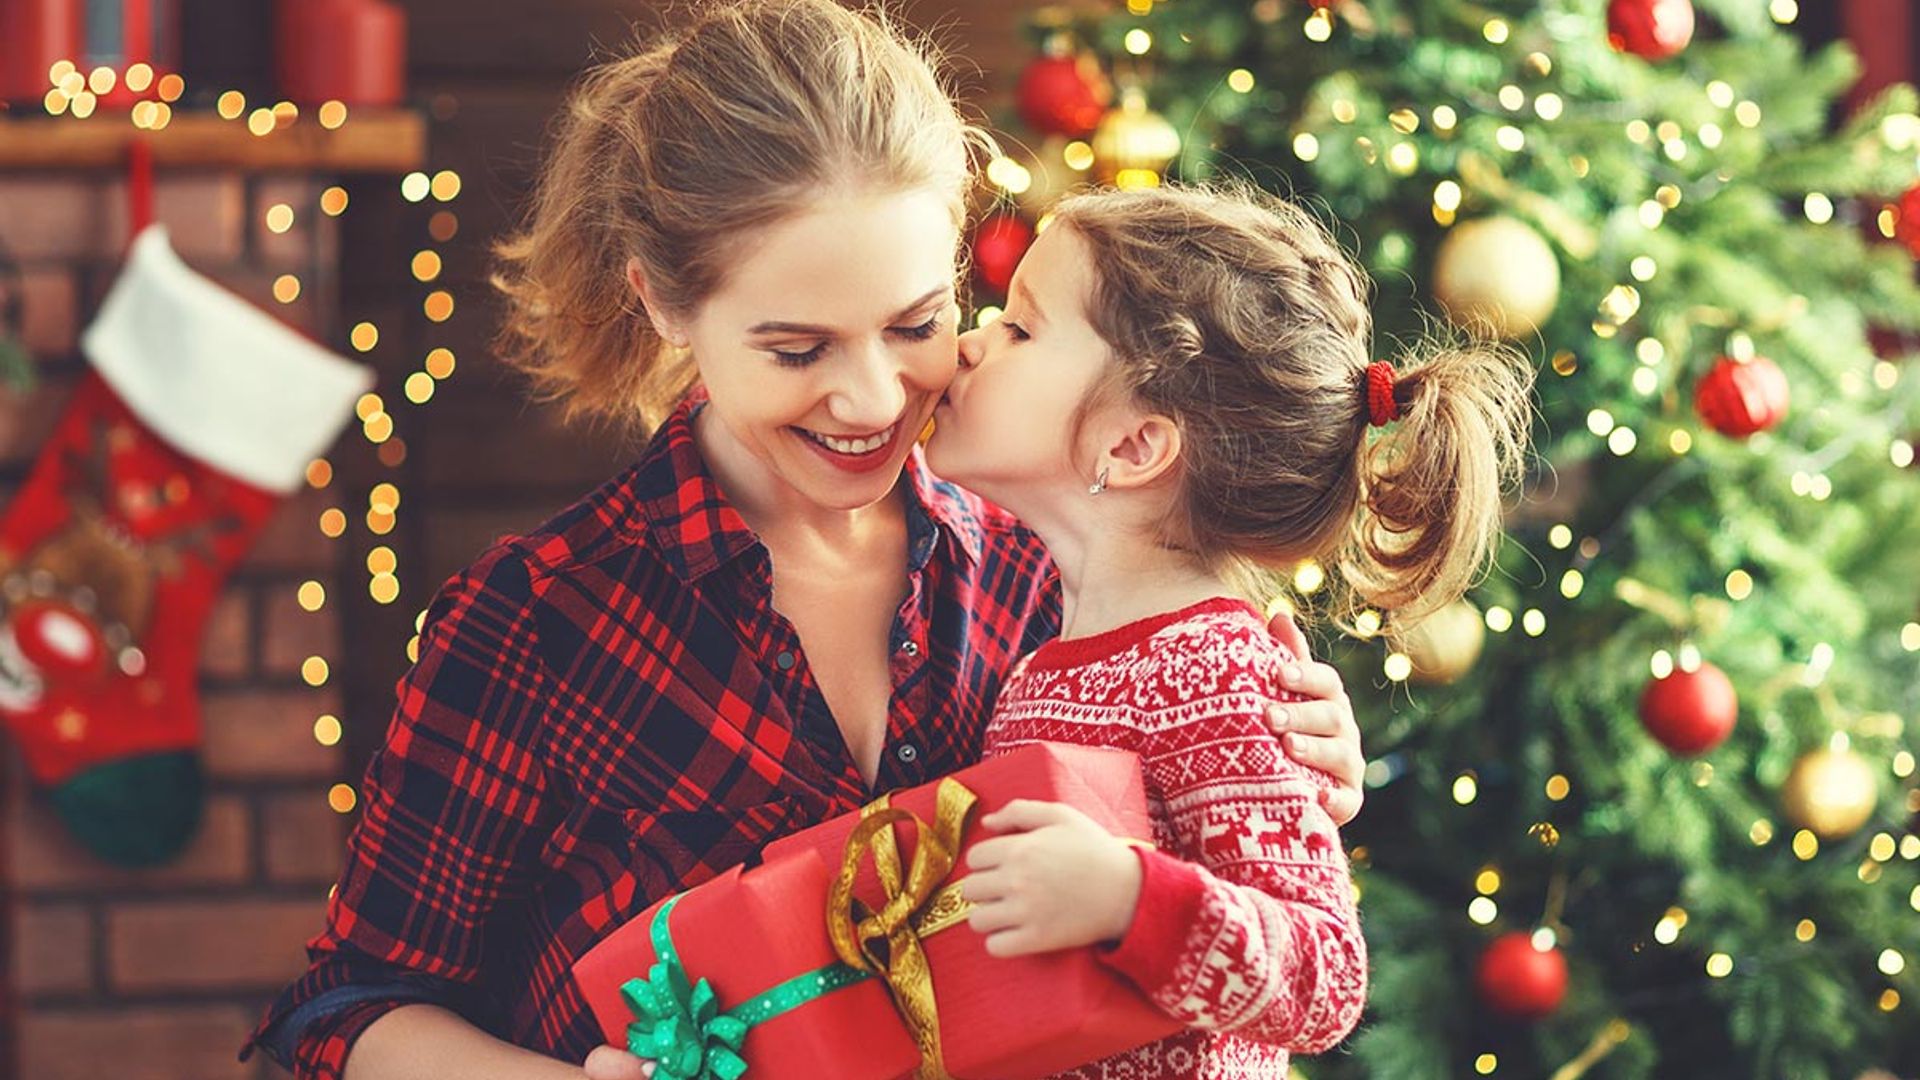 First Christmas co-parenting after separation? 5 tips to help get you through